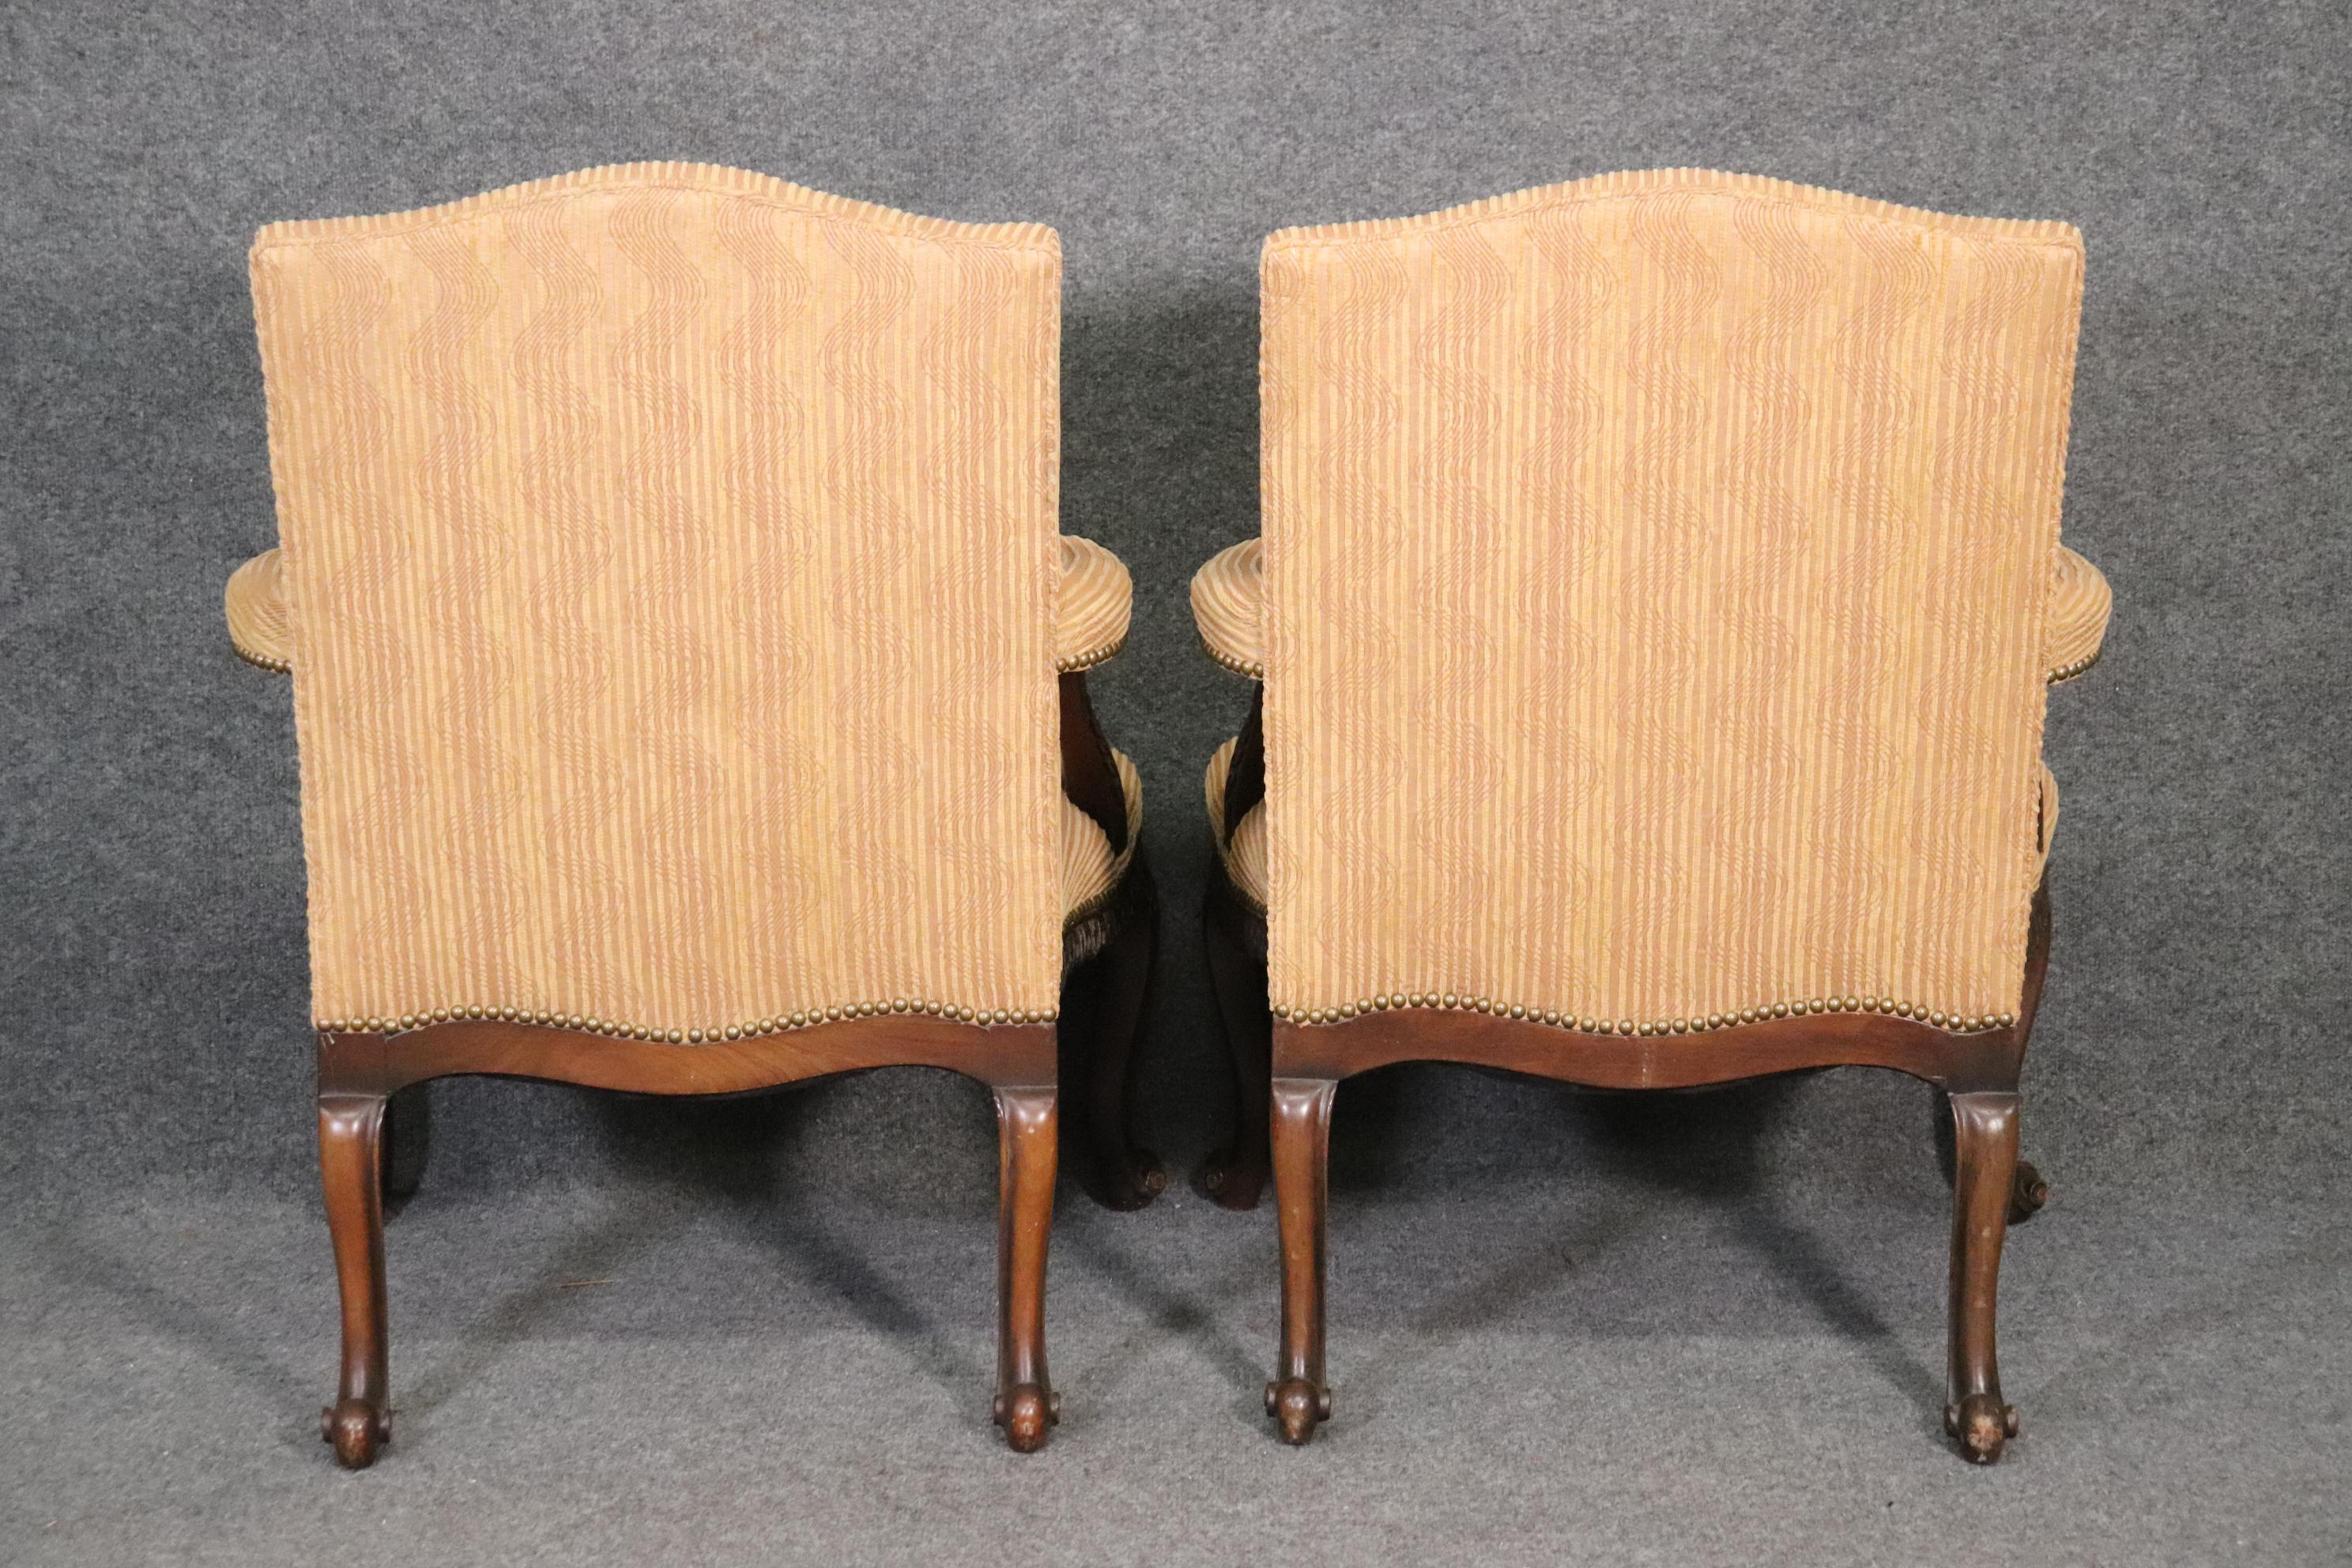 Mid-20th Century Pair of English Georgian Carved Mahogany Armchairs, Circa 1940s For Sale